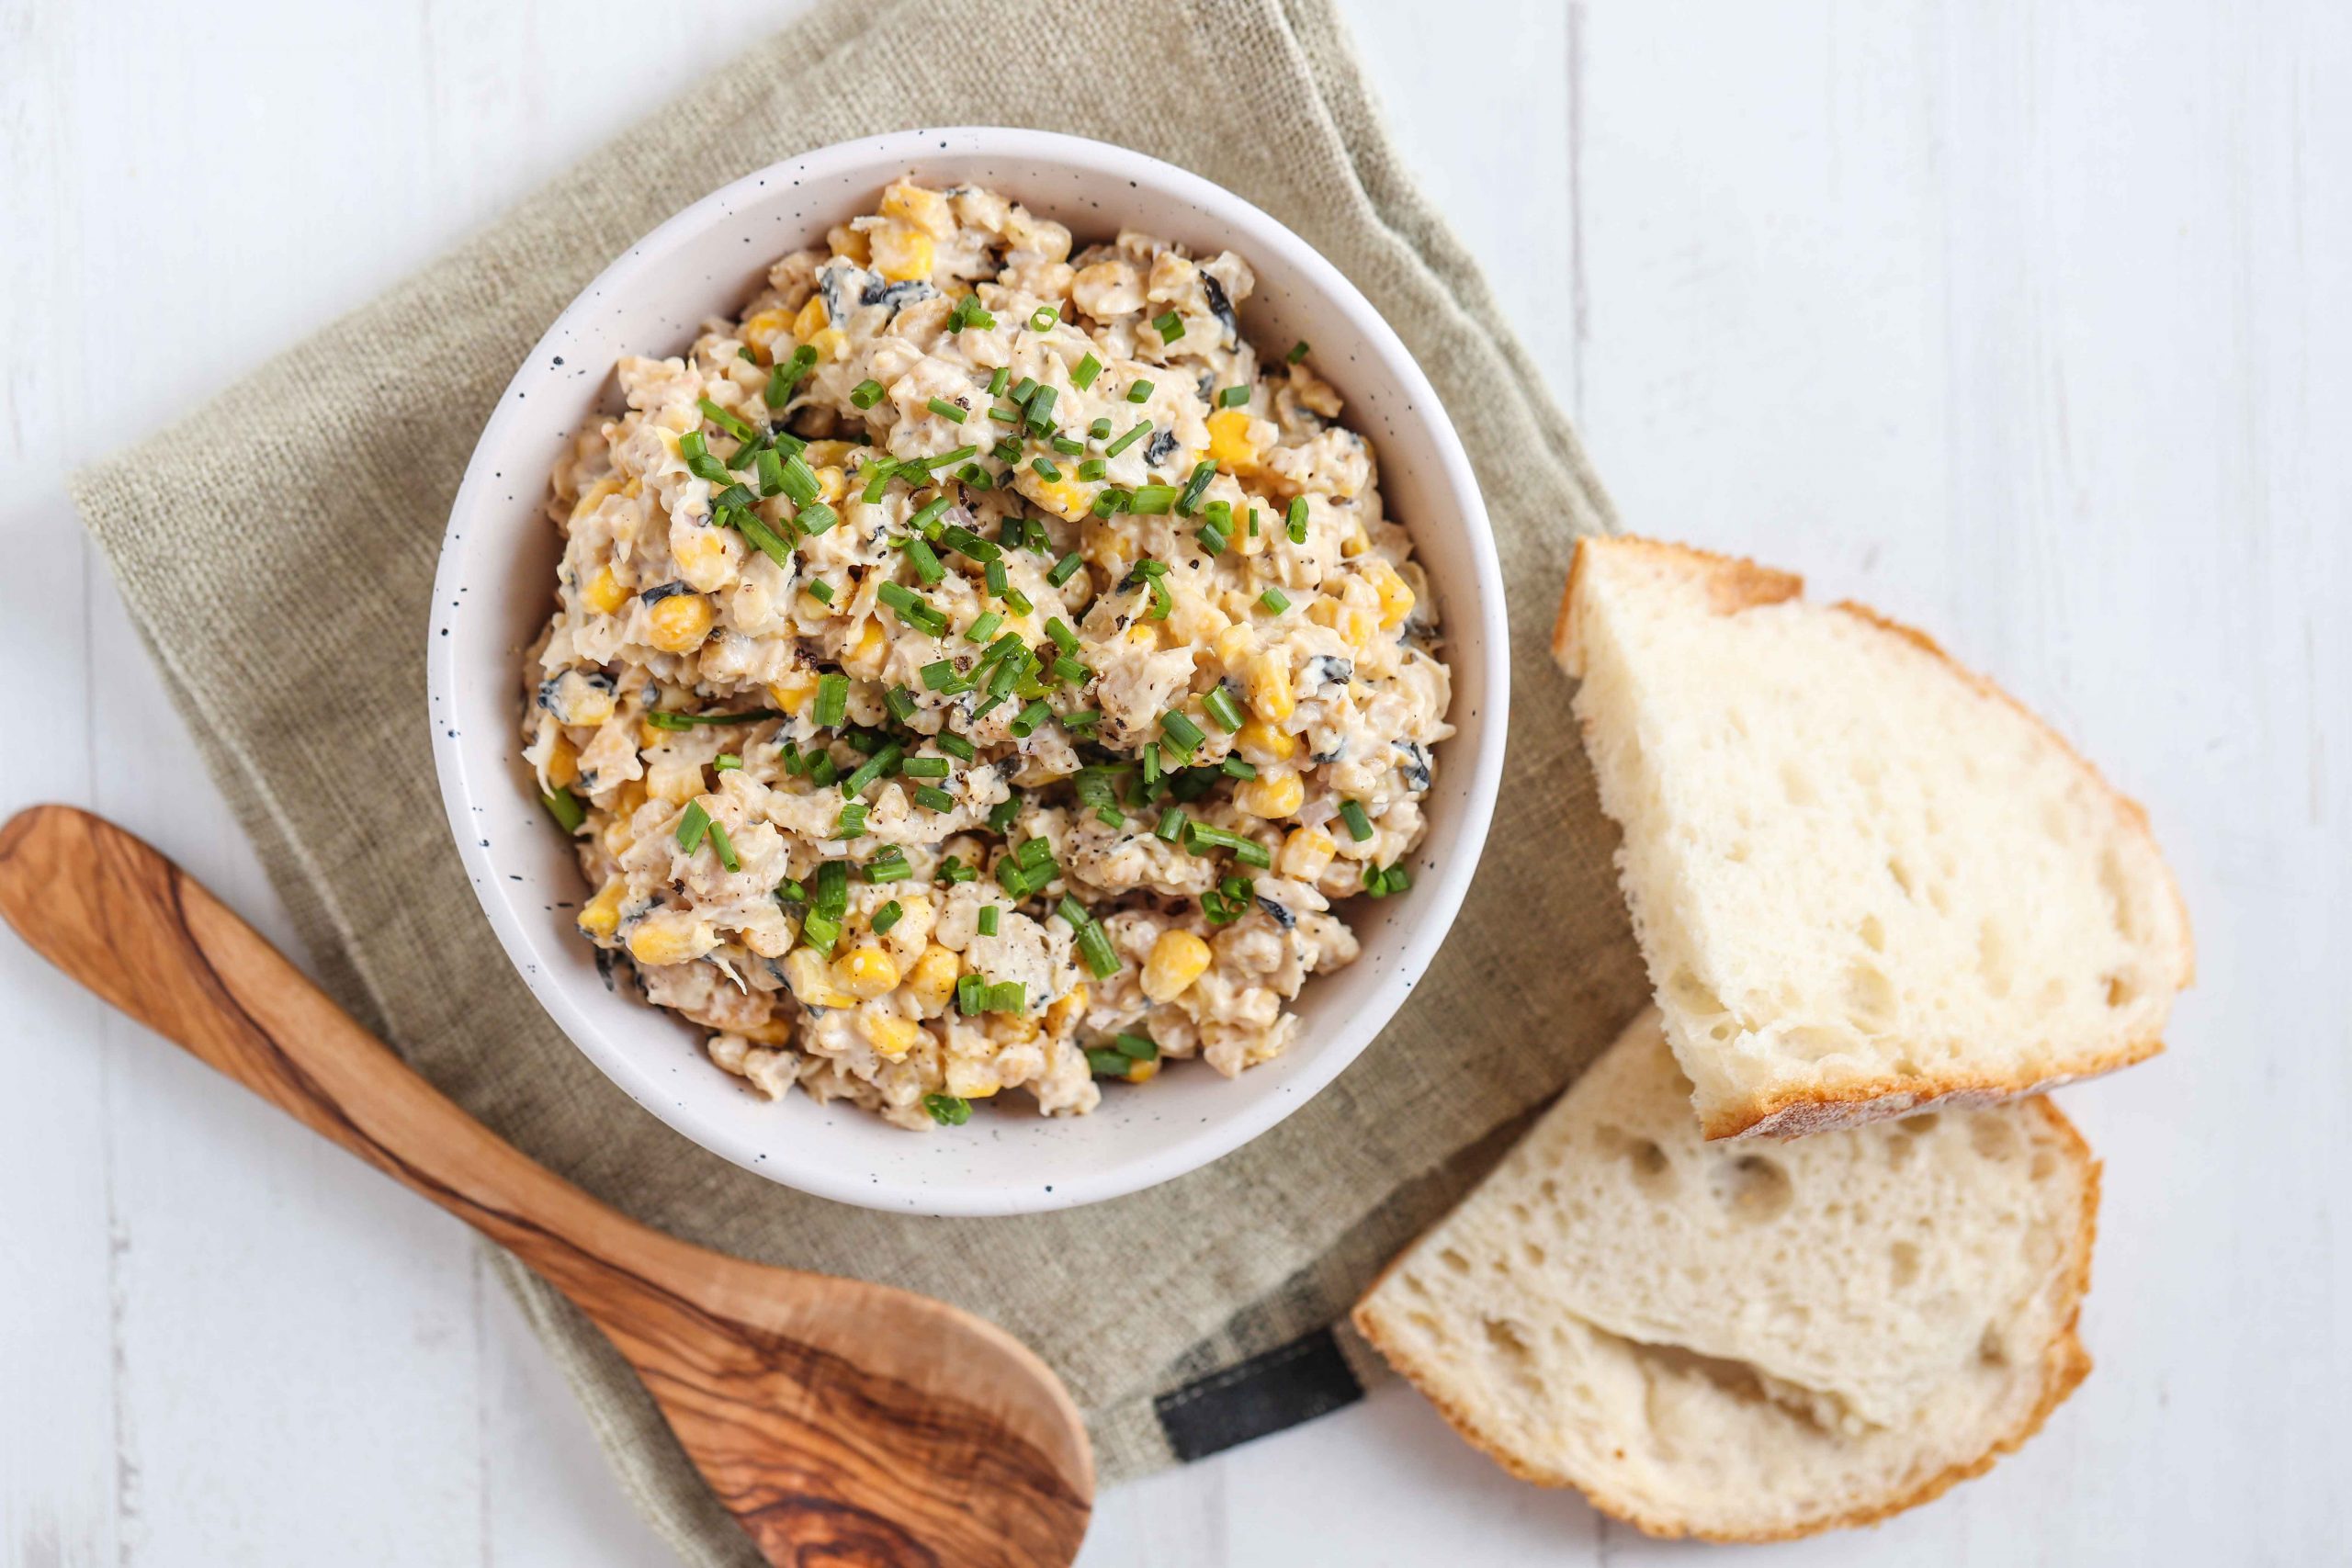 Chickpea tuna salad in bowl with slices of bread